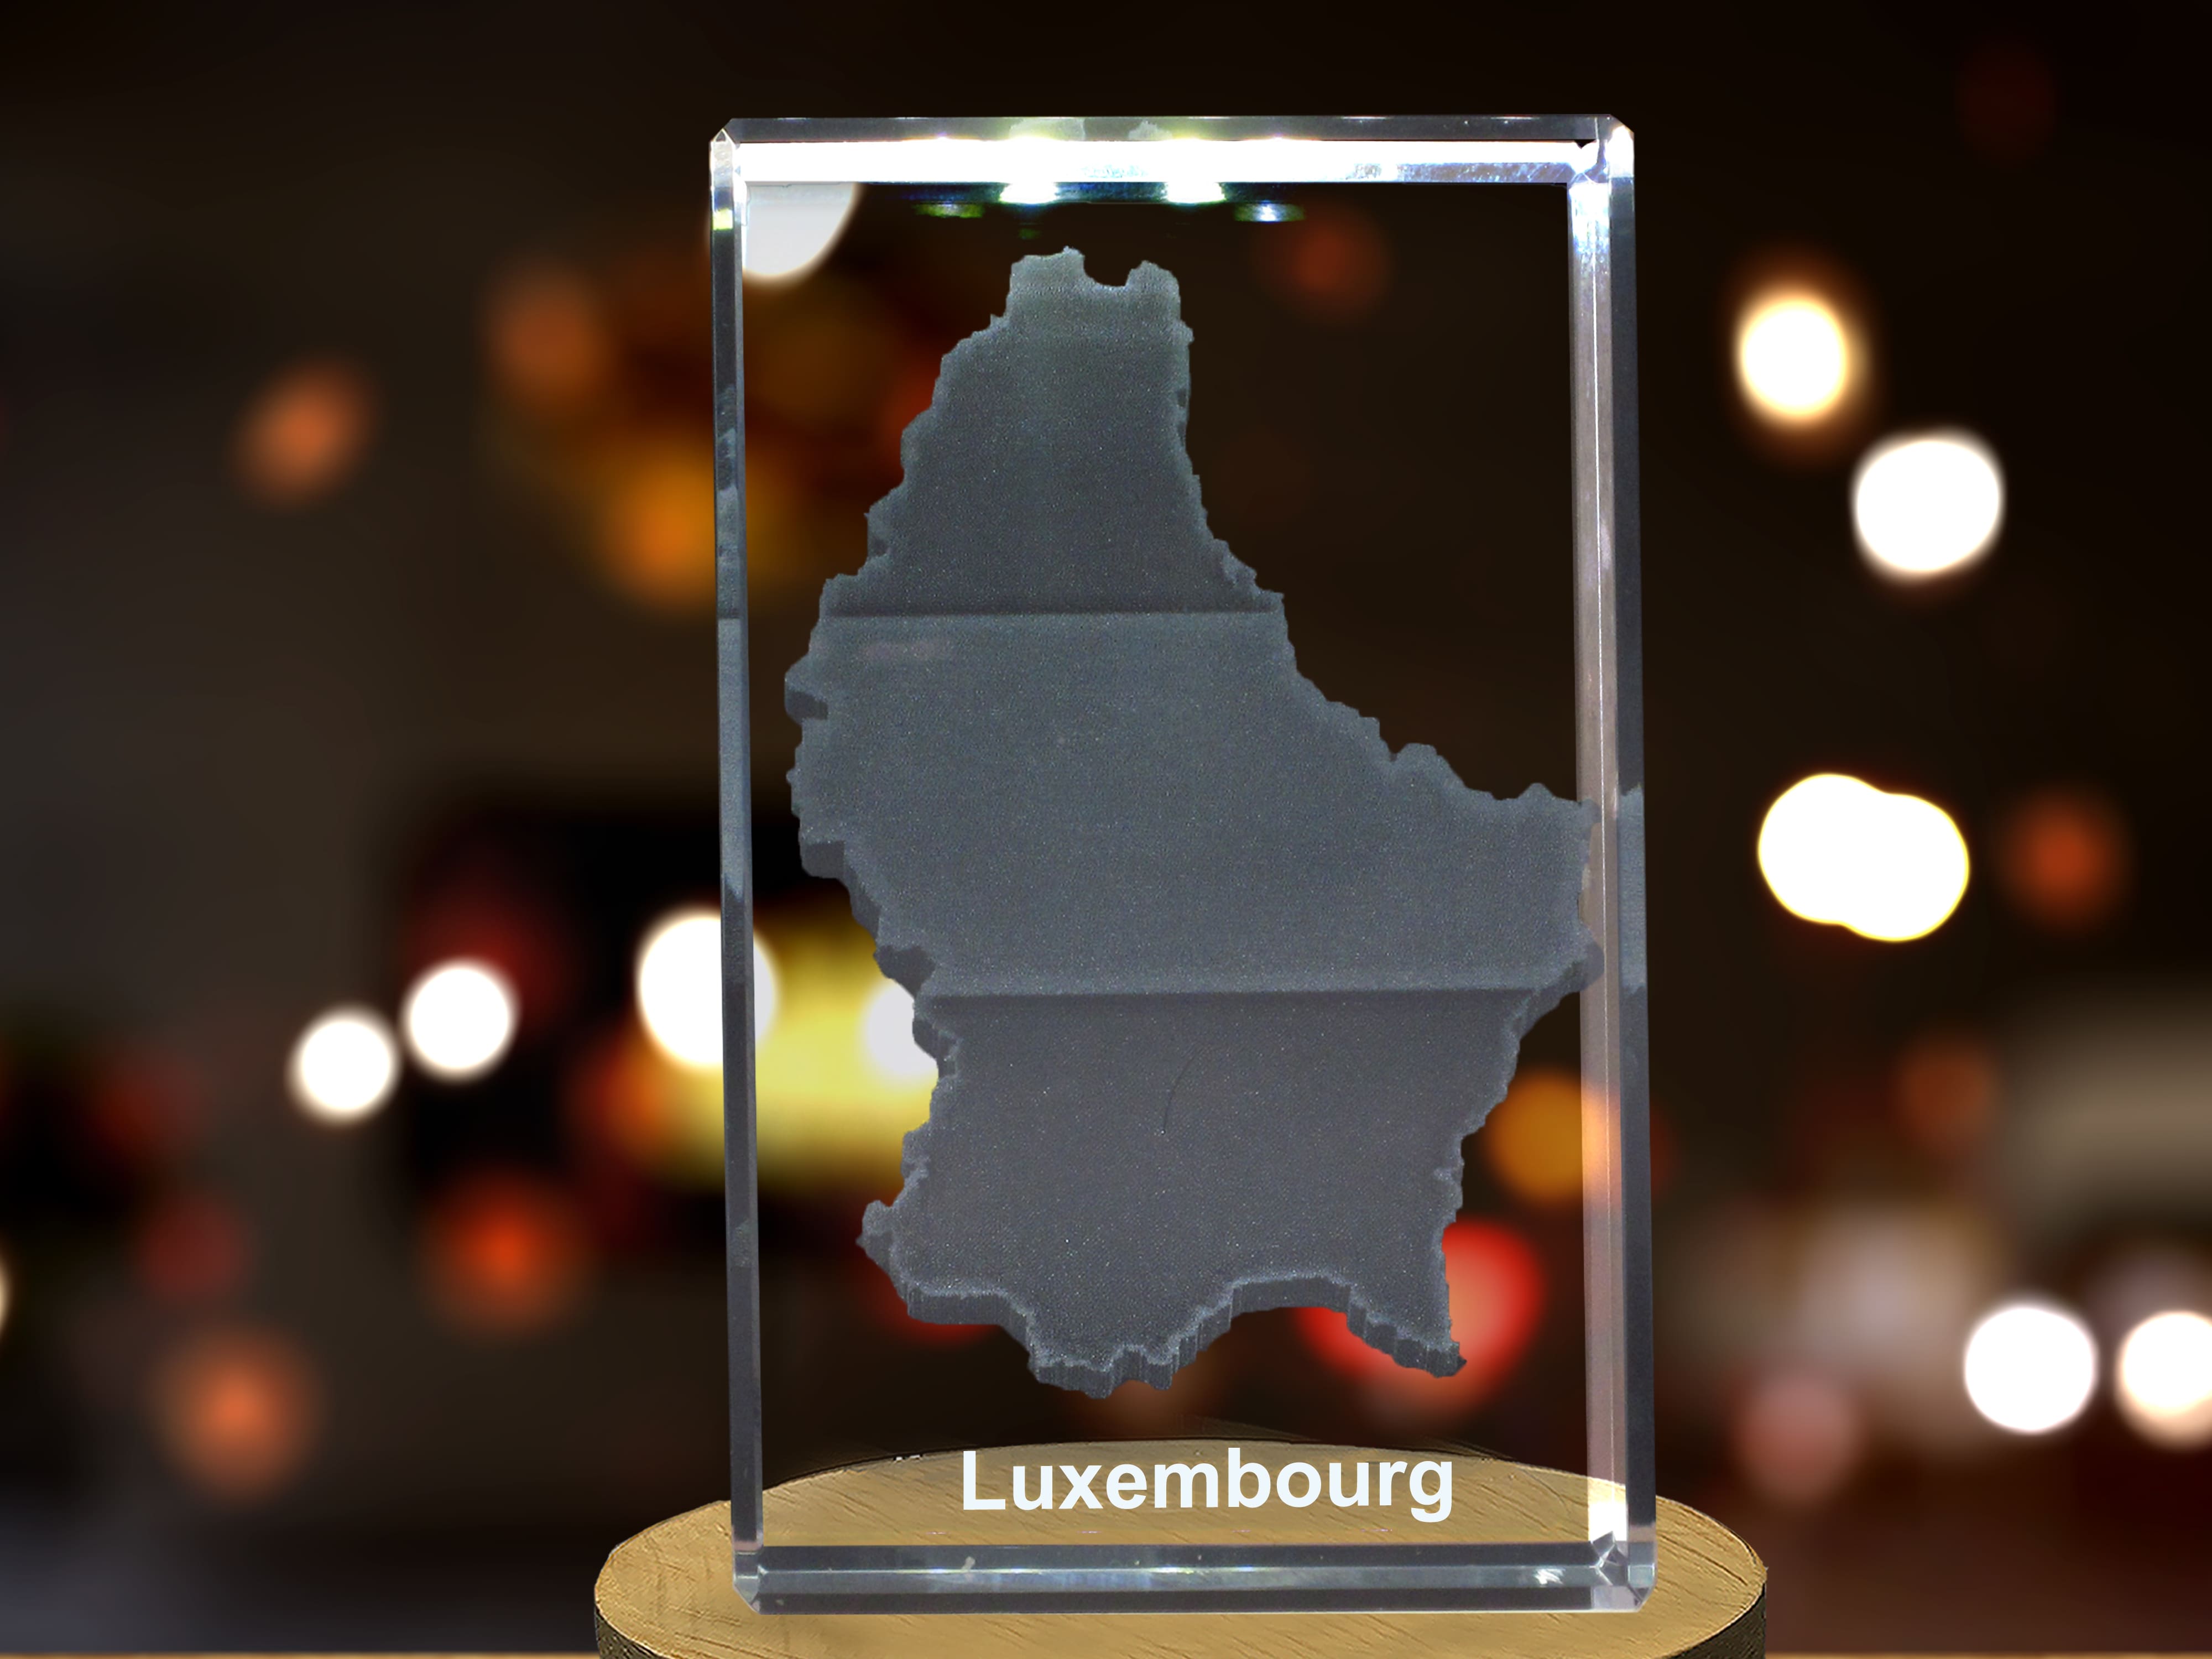 Luxembourg 3D Engraved Crystal 3D Engraved Crystal Keepsake/Gift/Decor/Collectible/Souvenir A&B Crystal Collection